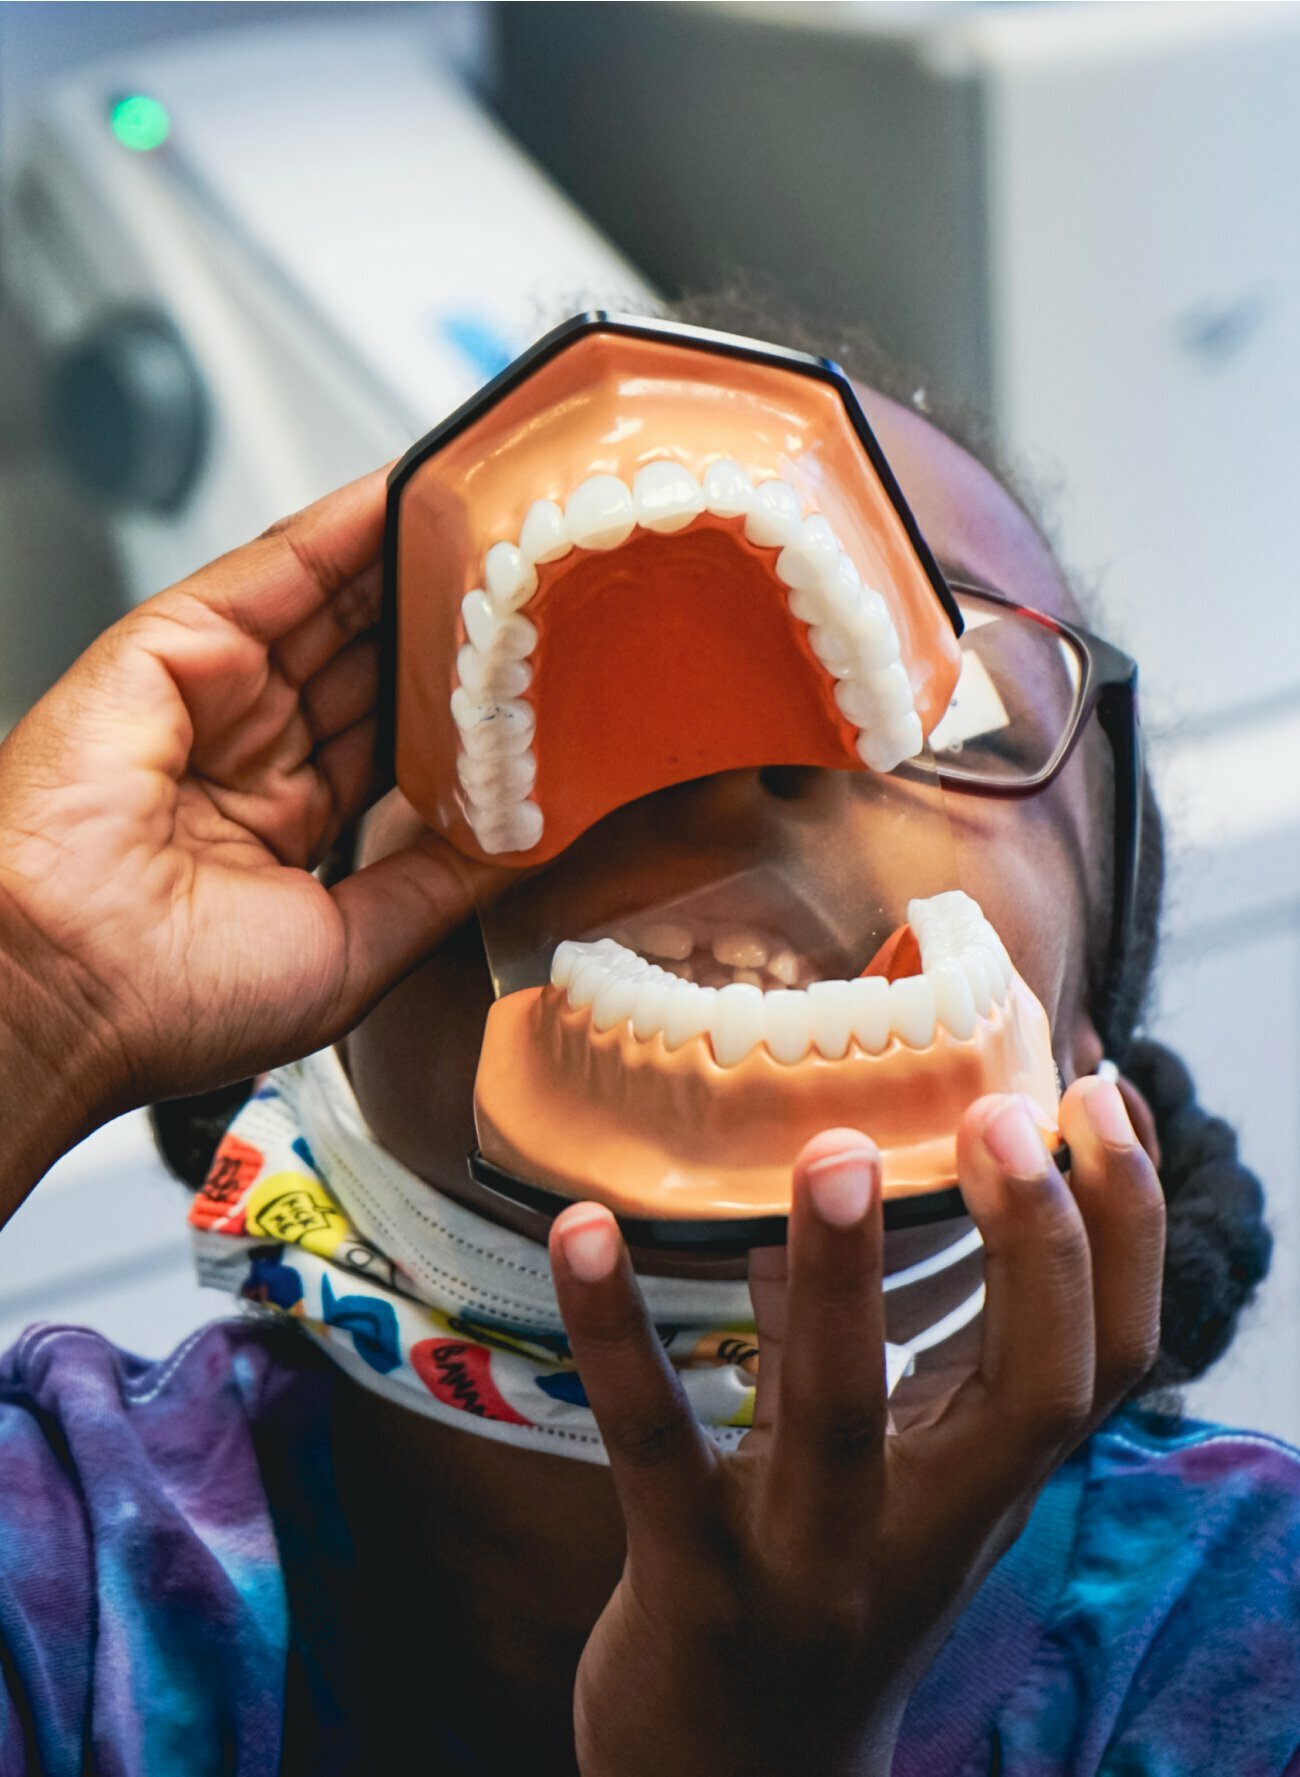 Beverly Hills Cosmetic Dentistry child patient playing with tooth models